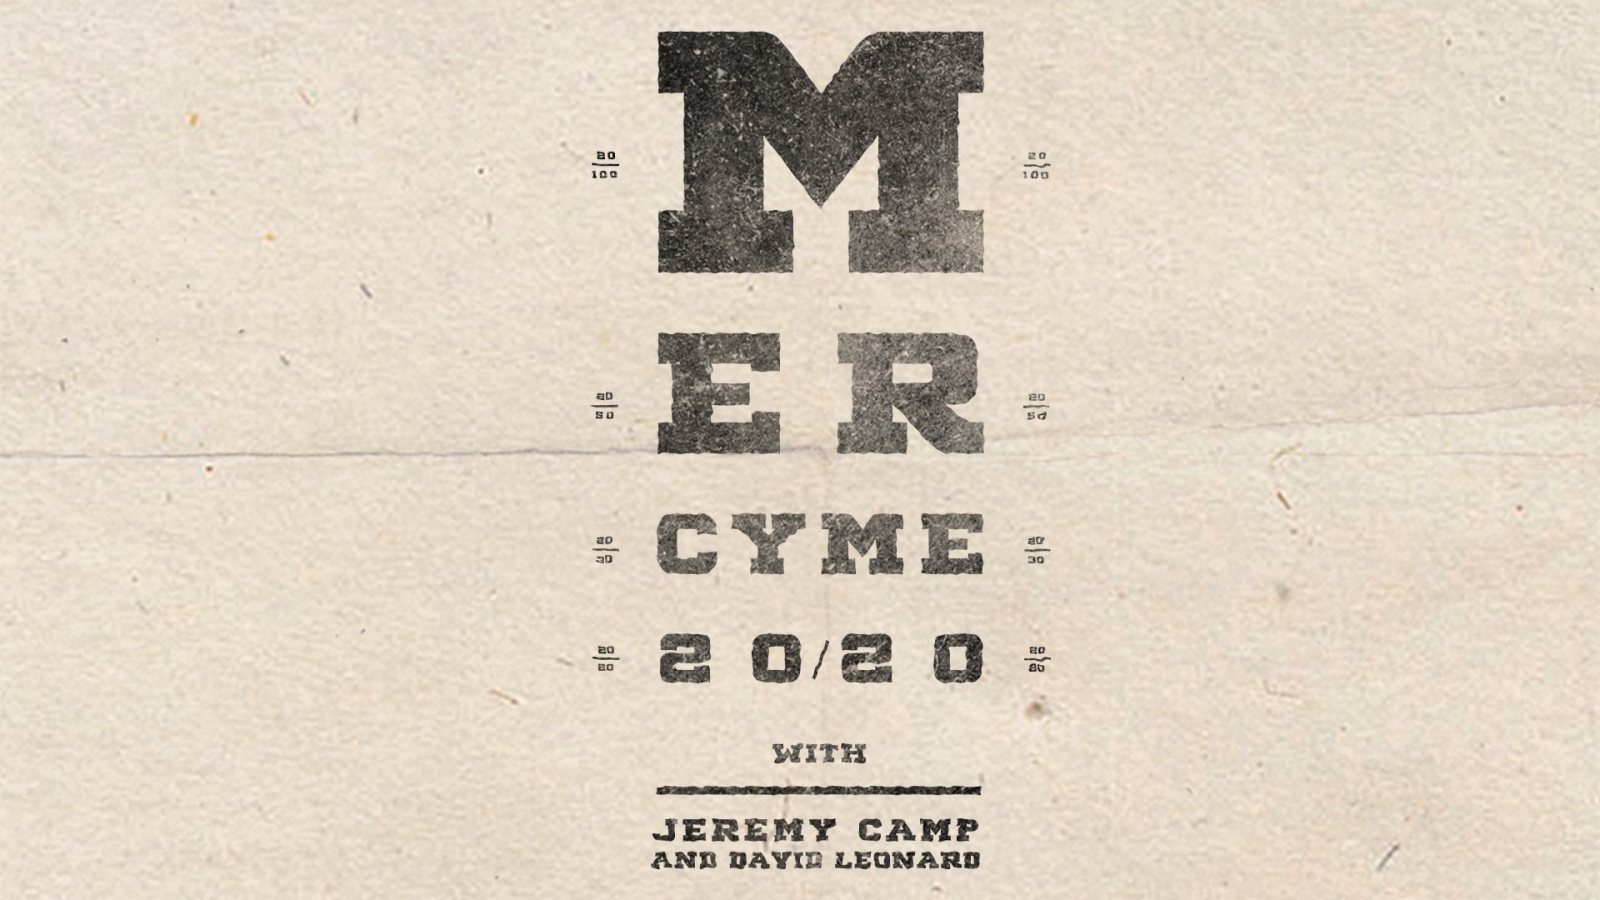 Mercyme Tour W Jeremy Camp For Your